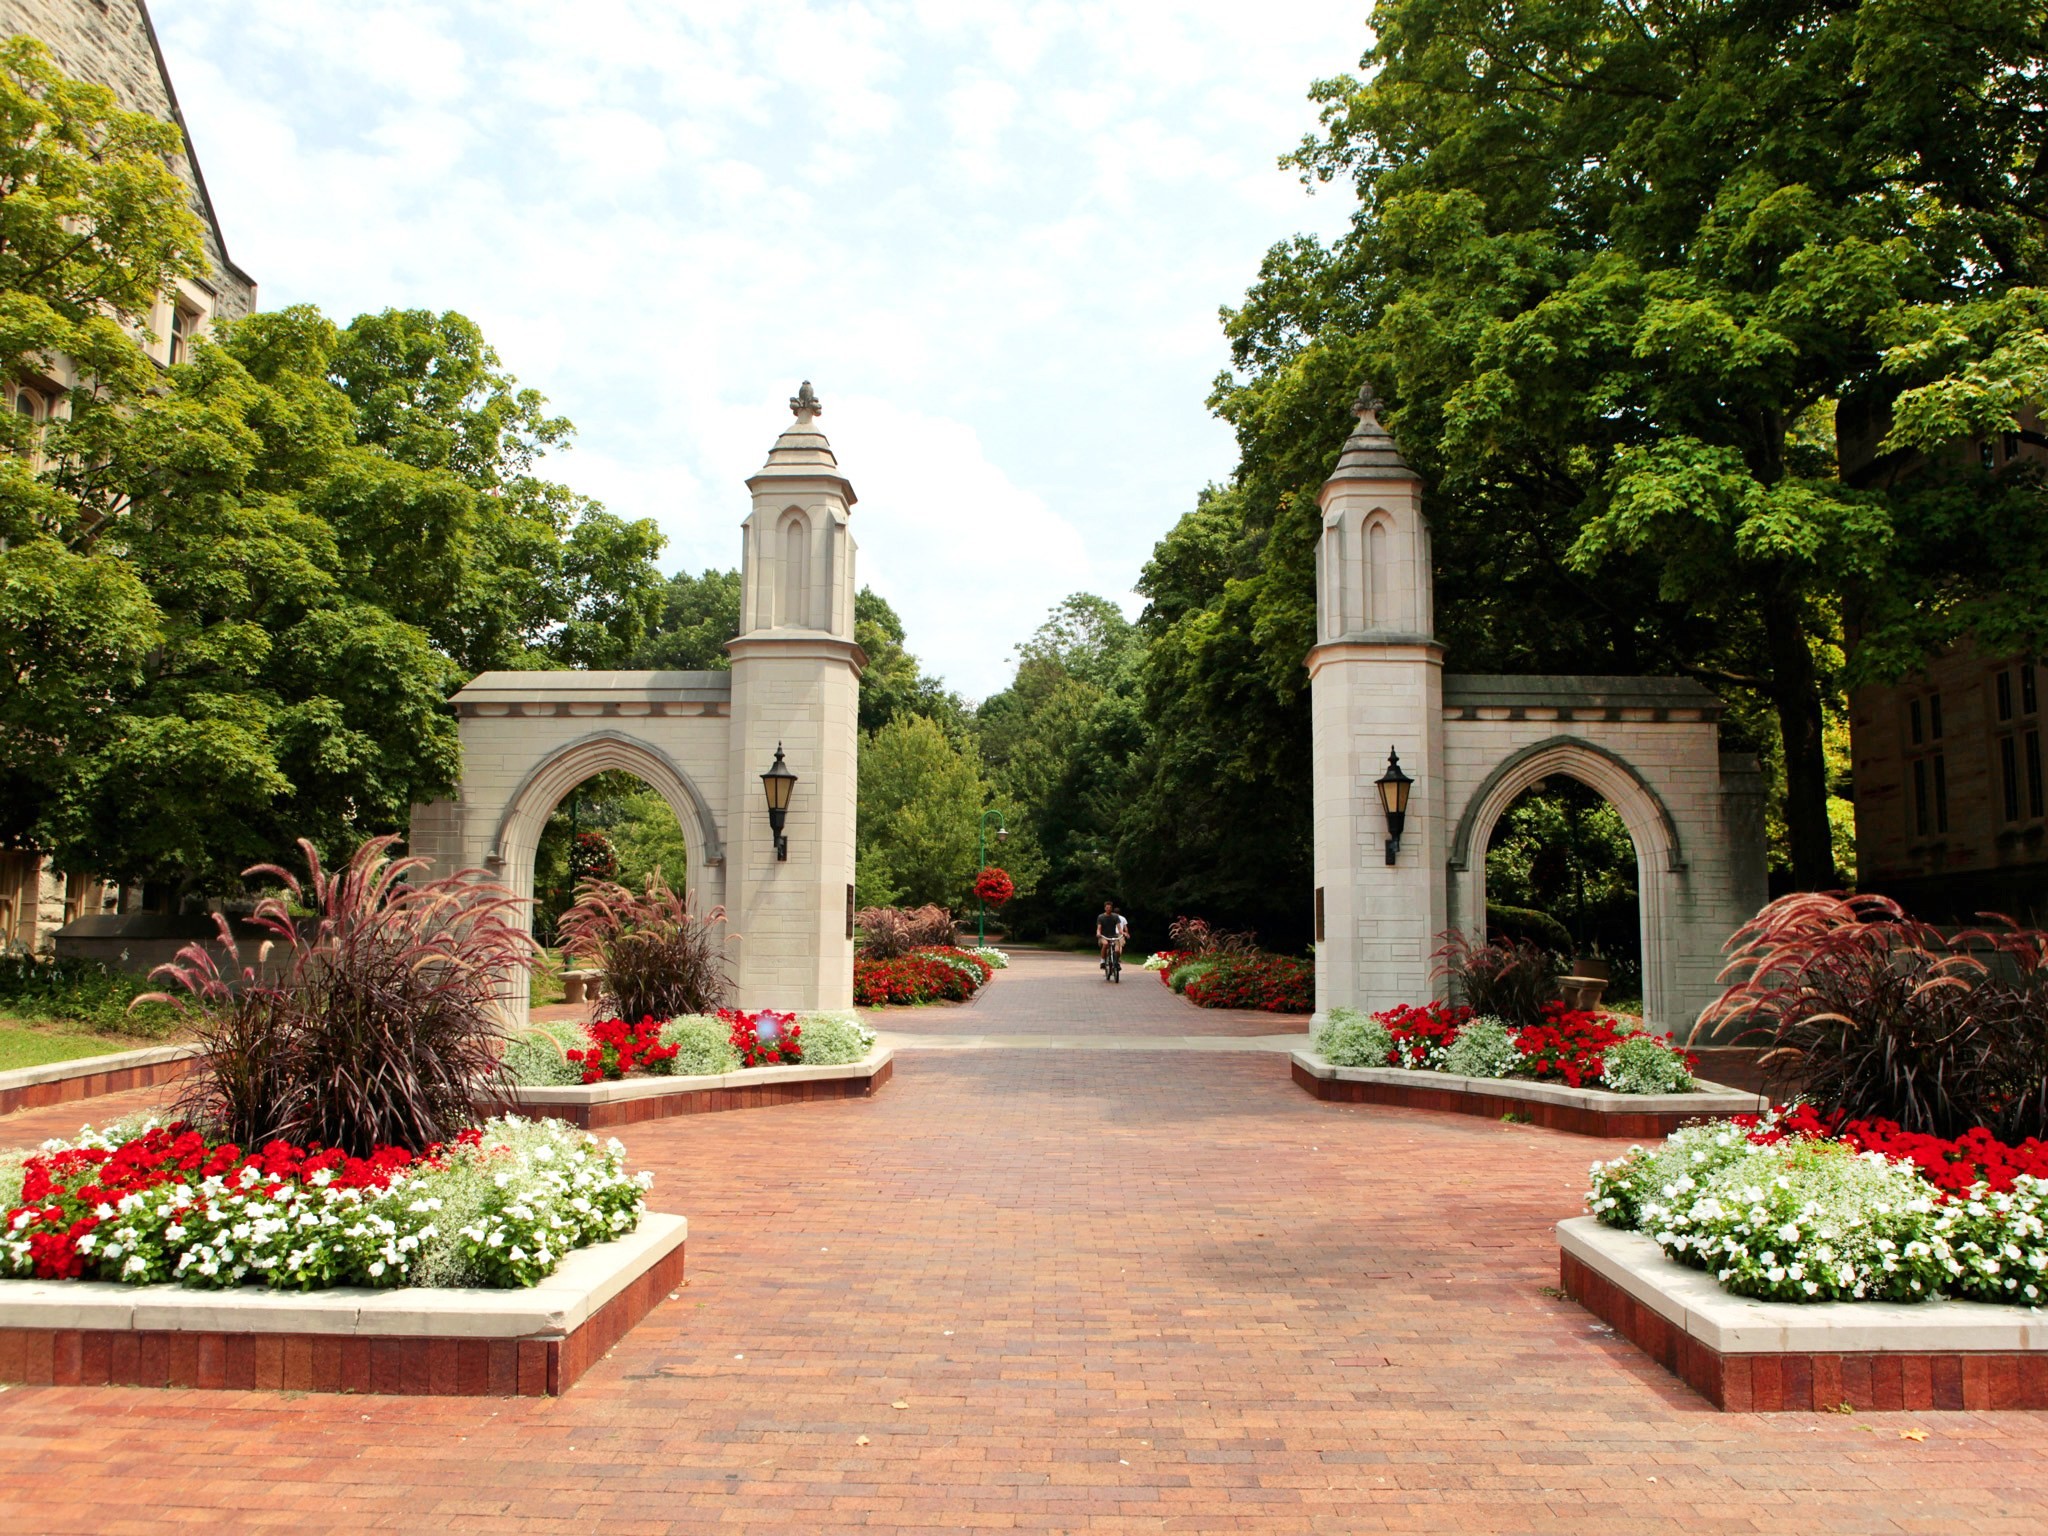 2048x1536 The 25 Most Beautiful College Campuses in America - Photos - CondÃ© Nast  Traveler